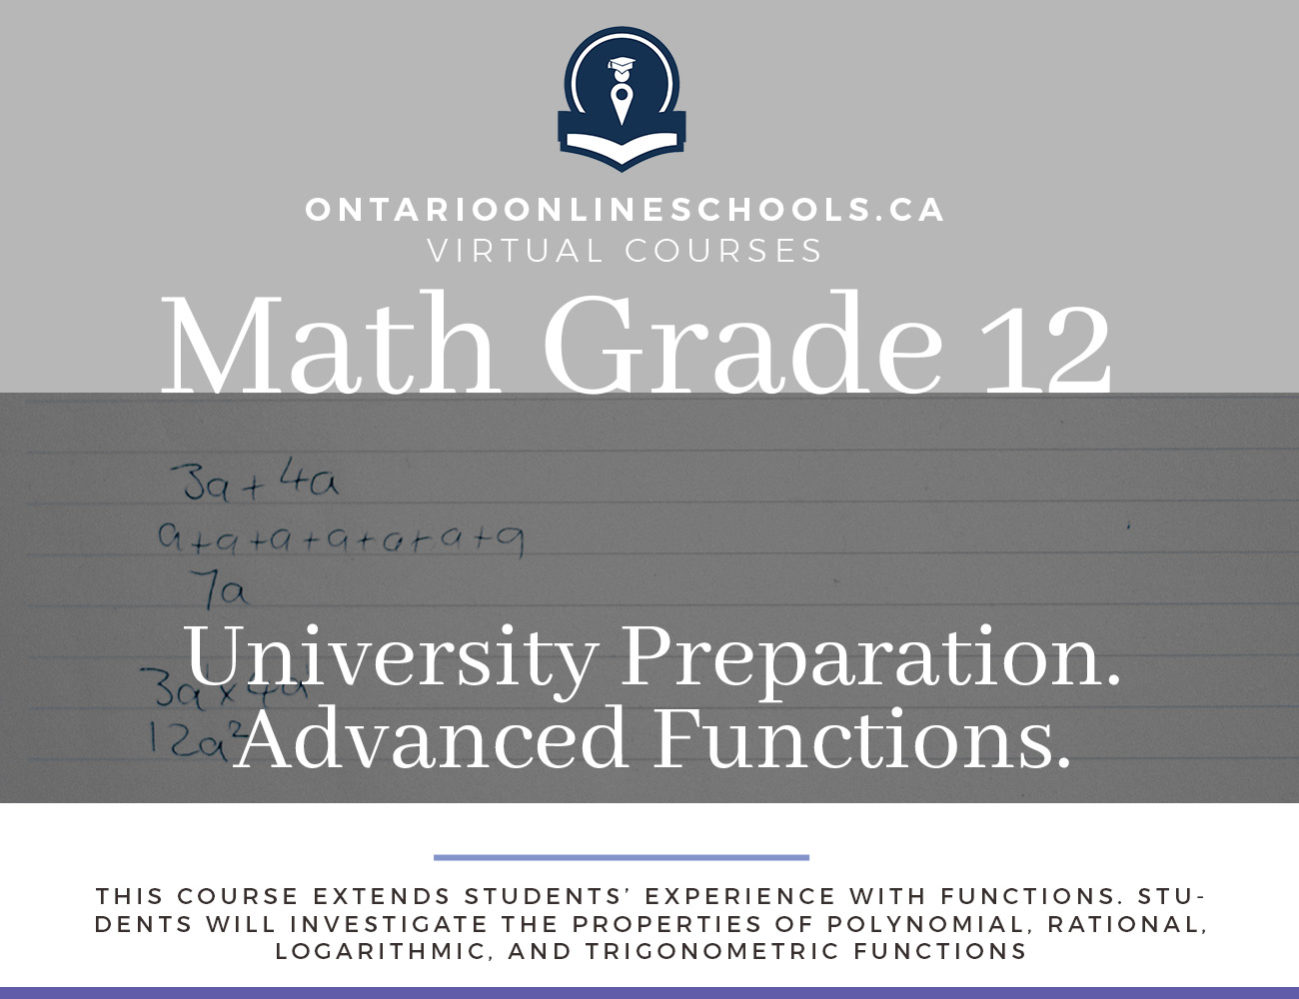 MHF4U, Grade 12 Advanced Functions, Online Course